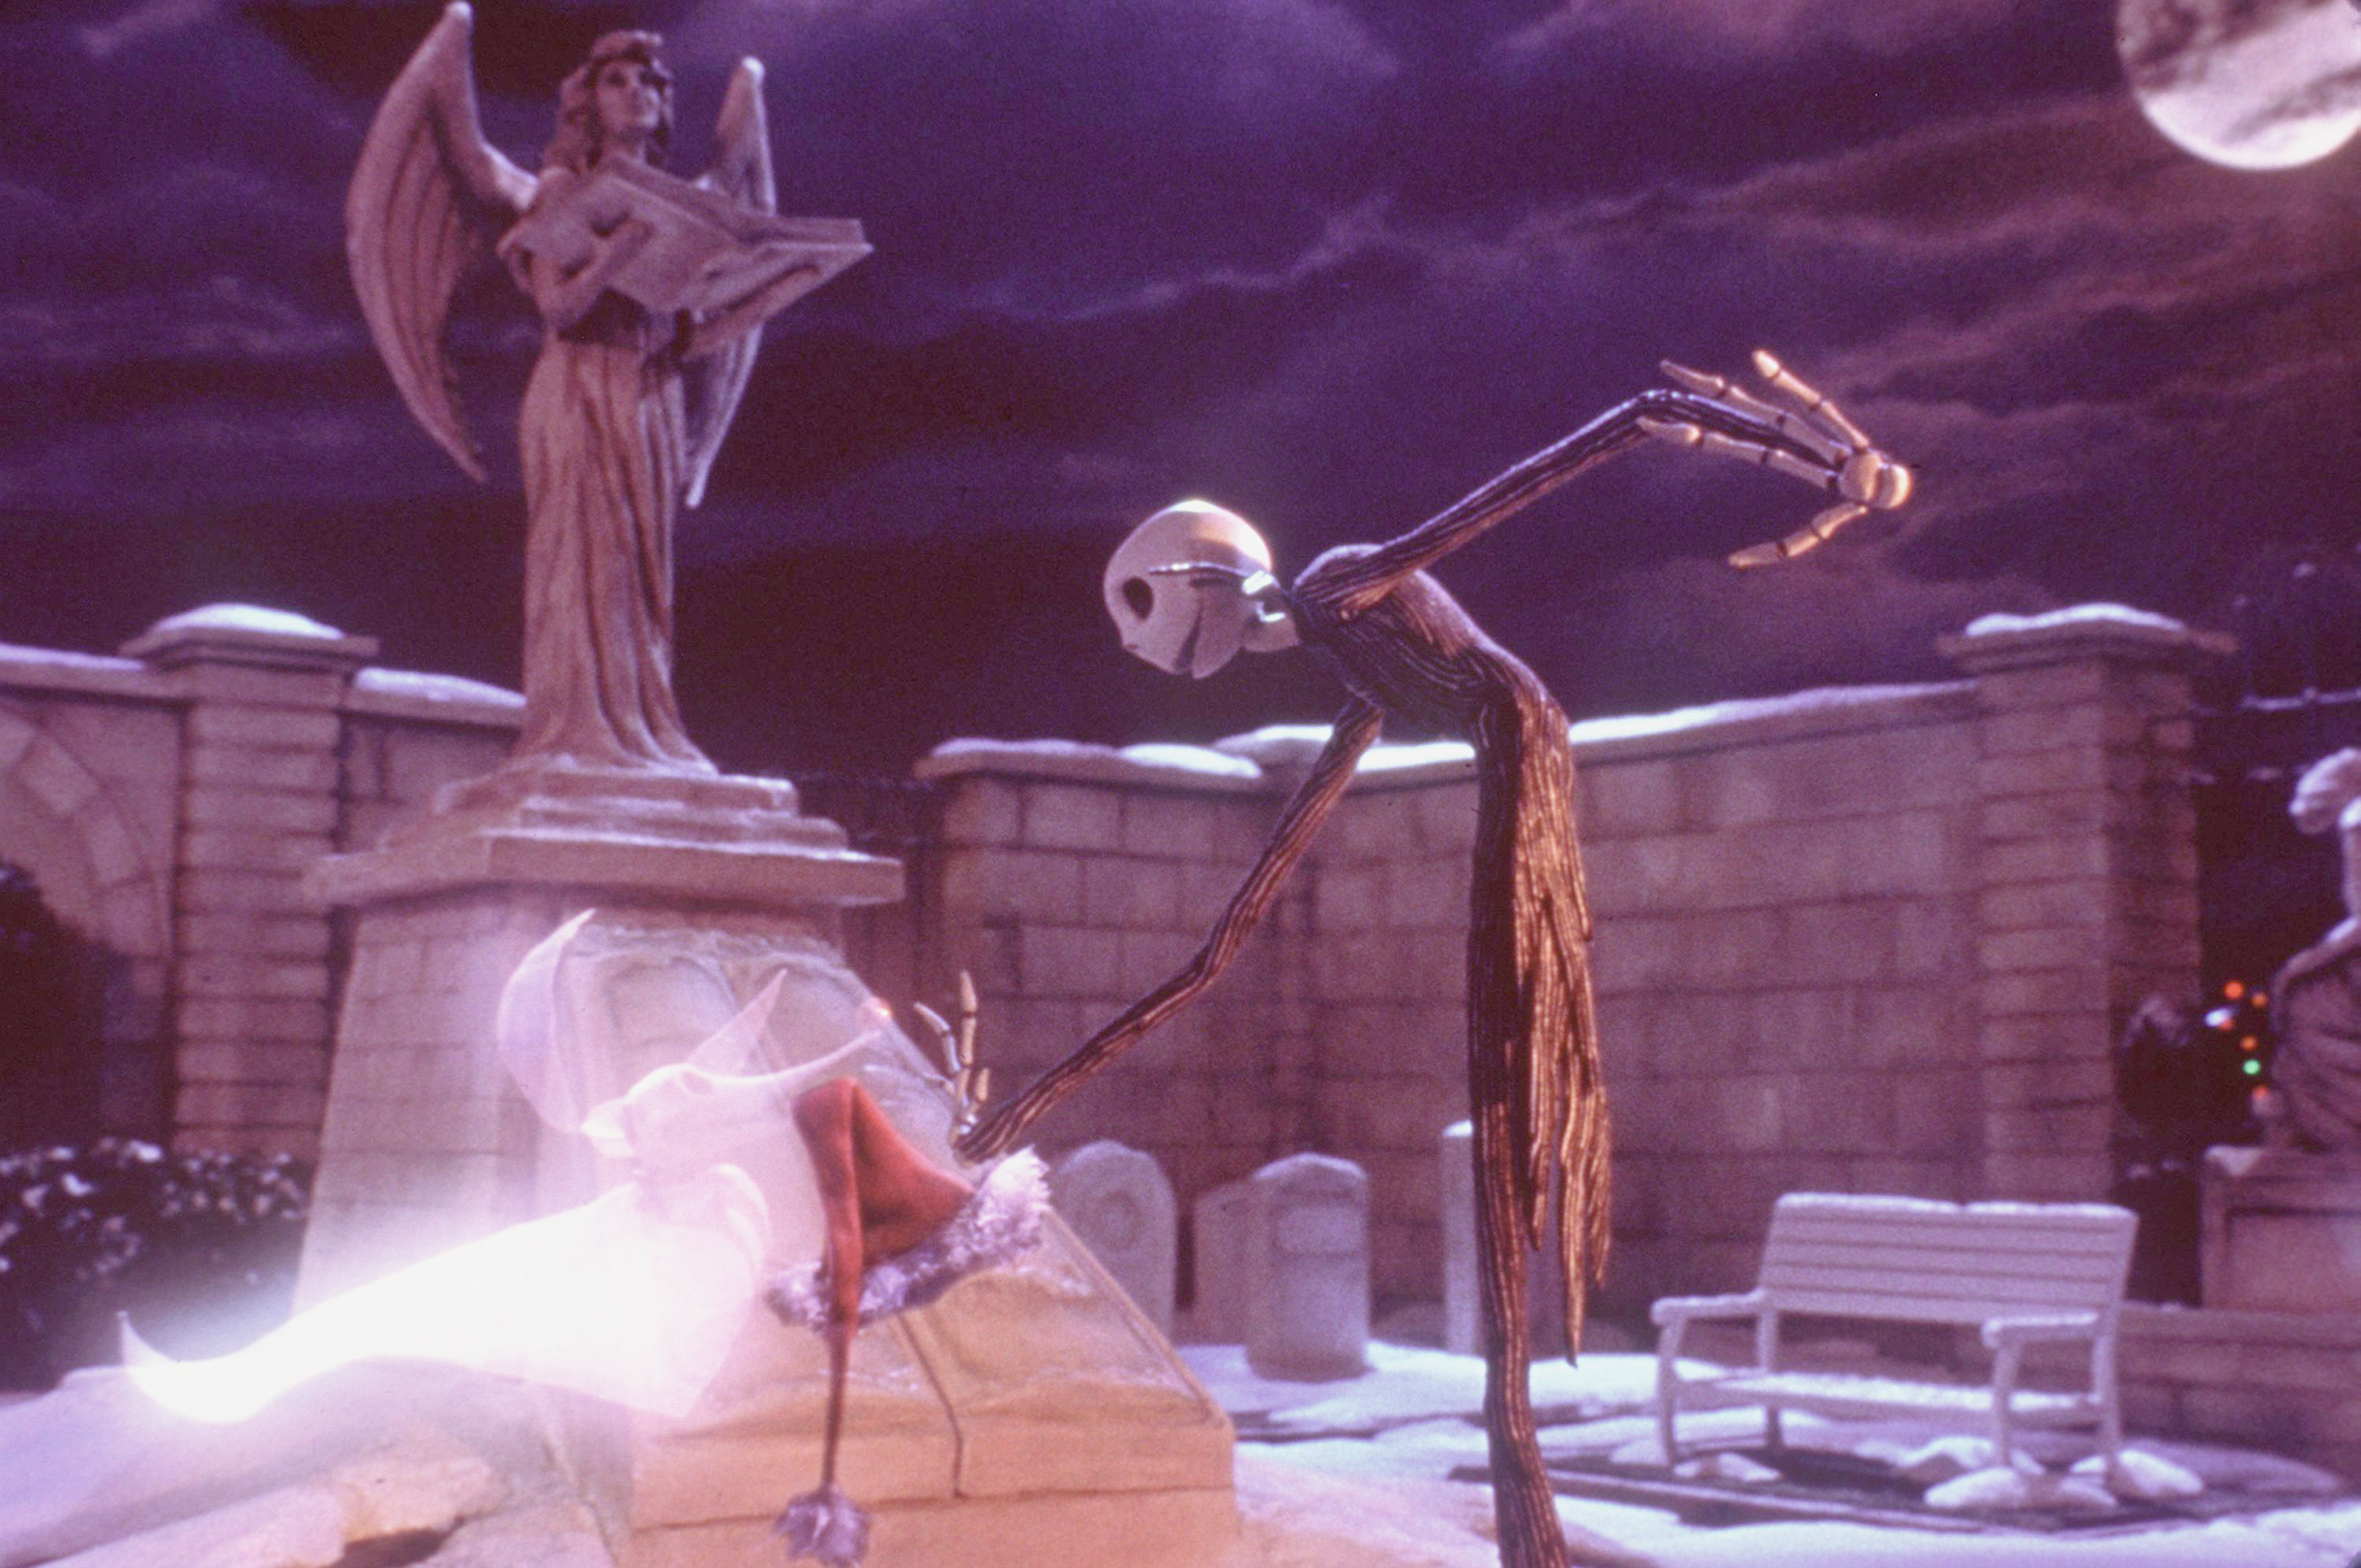 Weynand: The Nightmare Before Christmas Is Definitively a